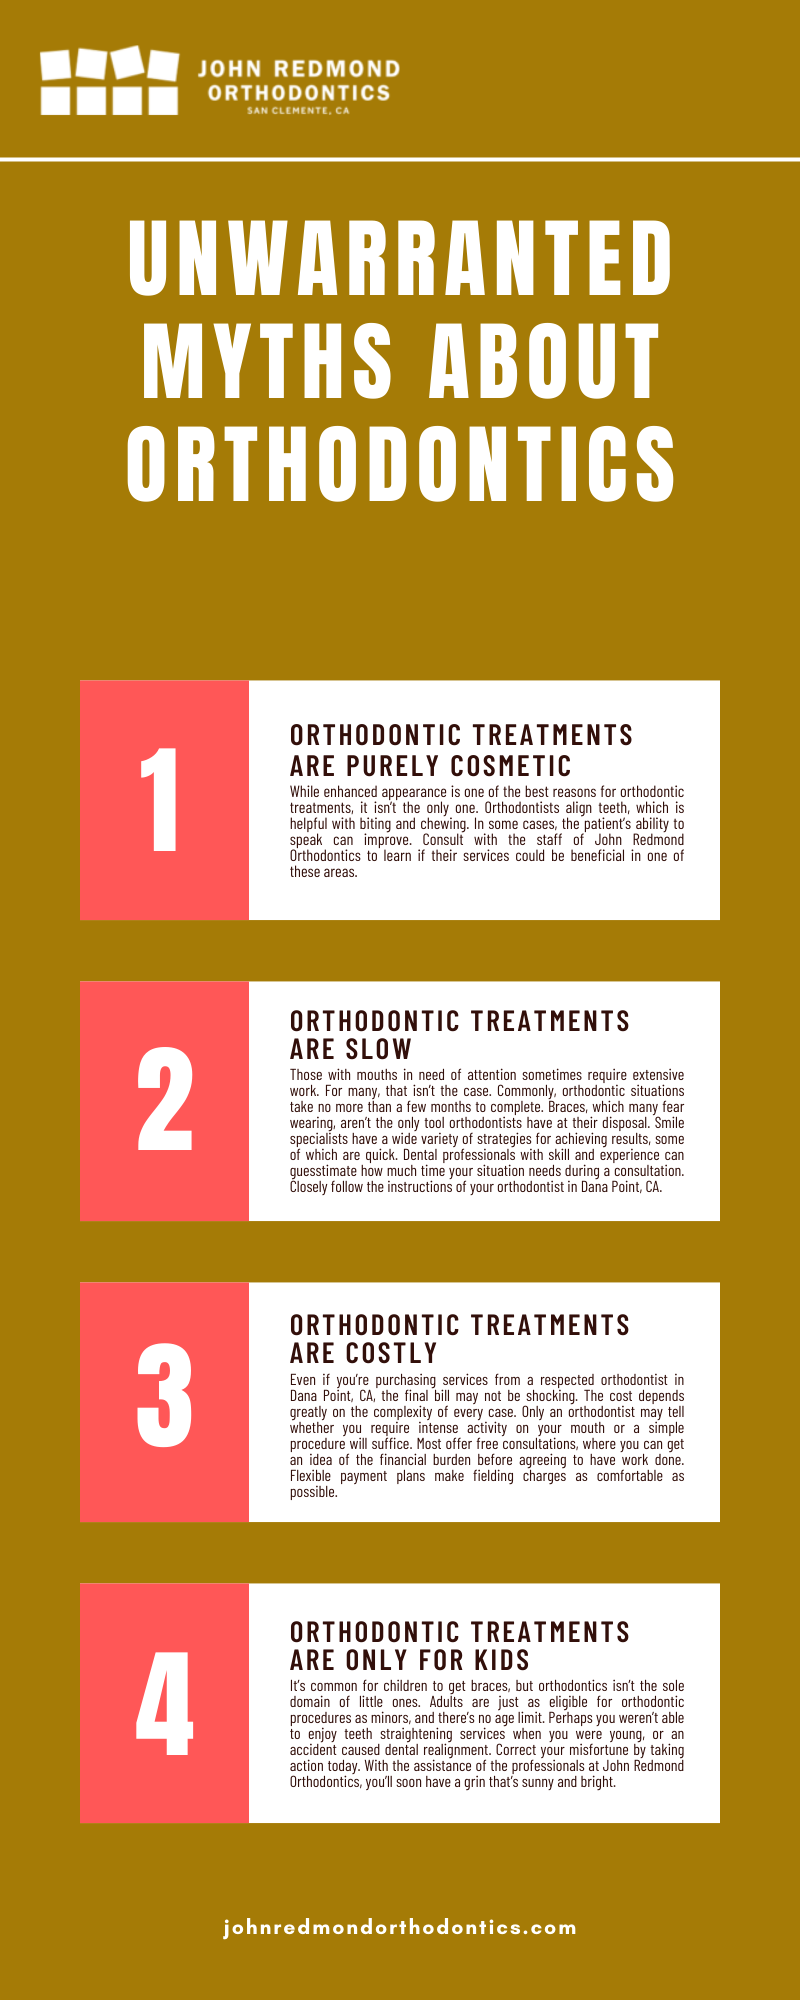 UNWARRANTED MYTHS ABOUT ORTHODONTICS INFOGRAPHIC